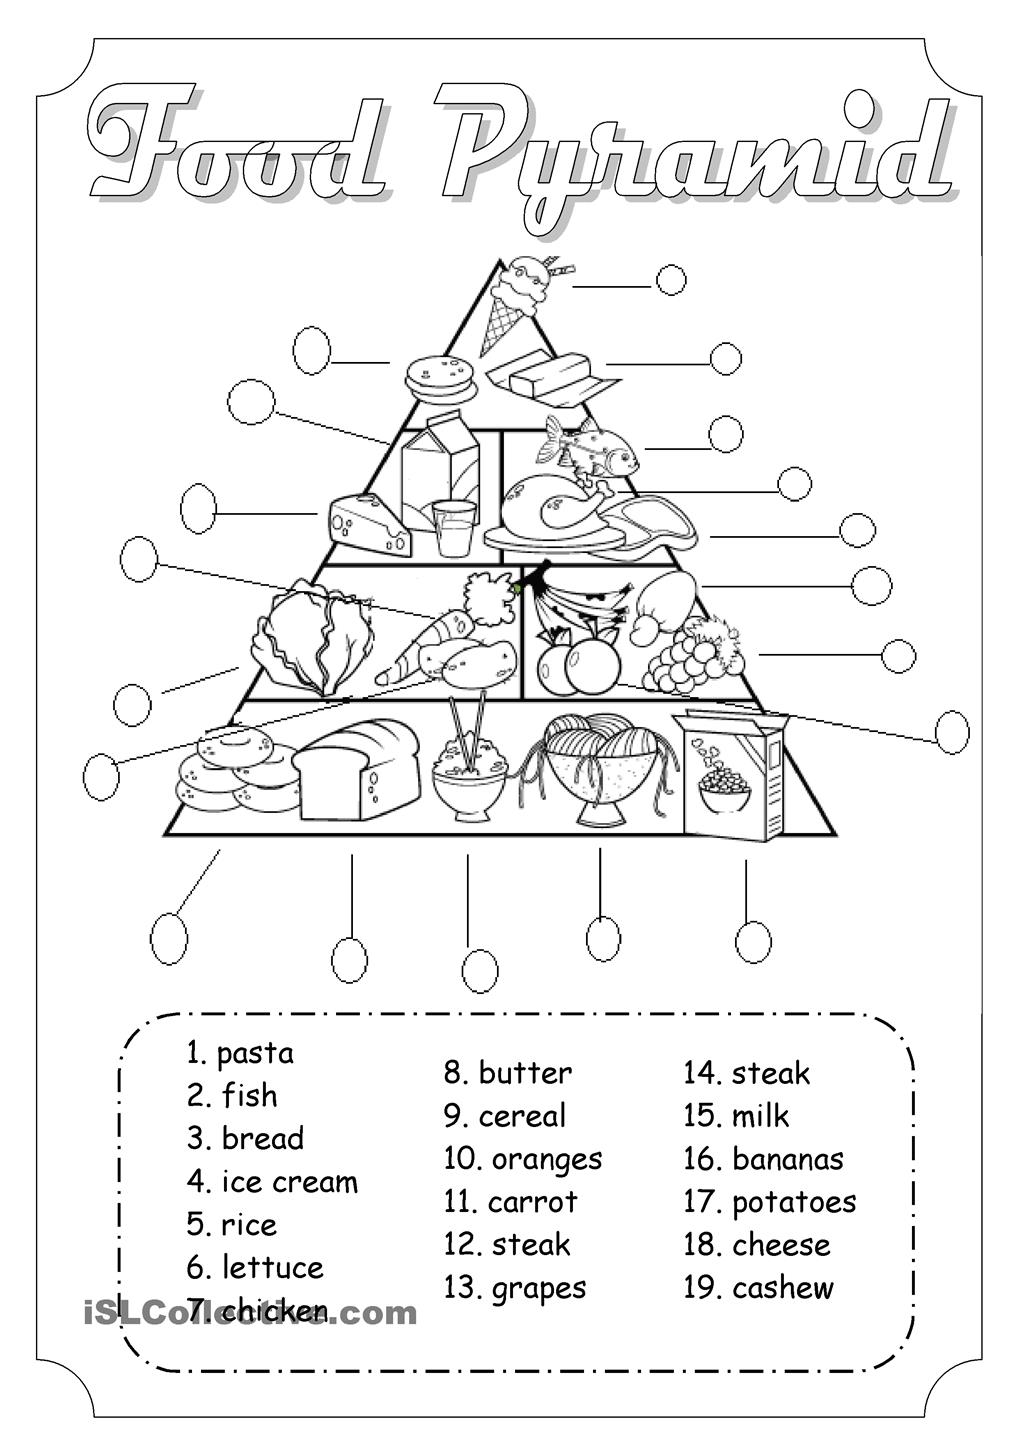 15-best-images-of-healthy-food-cut-and-paste-worksheets-food-pyramid